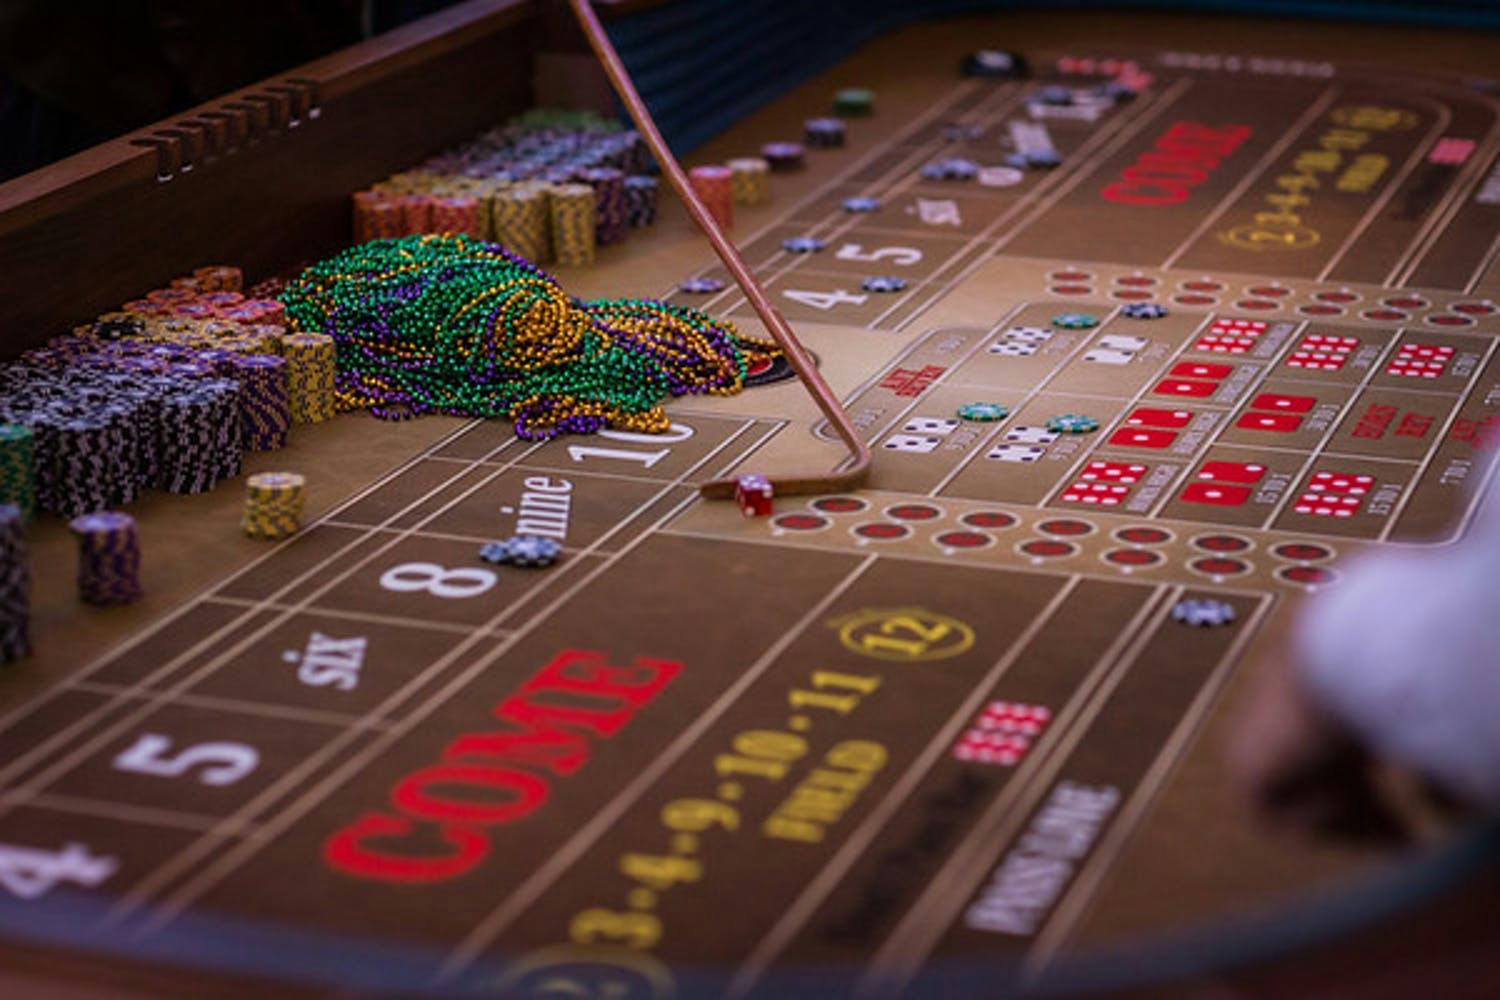 Mardi Gras beads lay on casino table at Mardi Gras themed corporate event | PartySlate